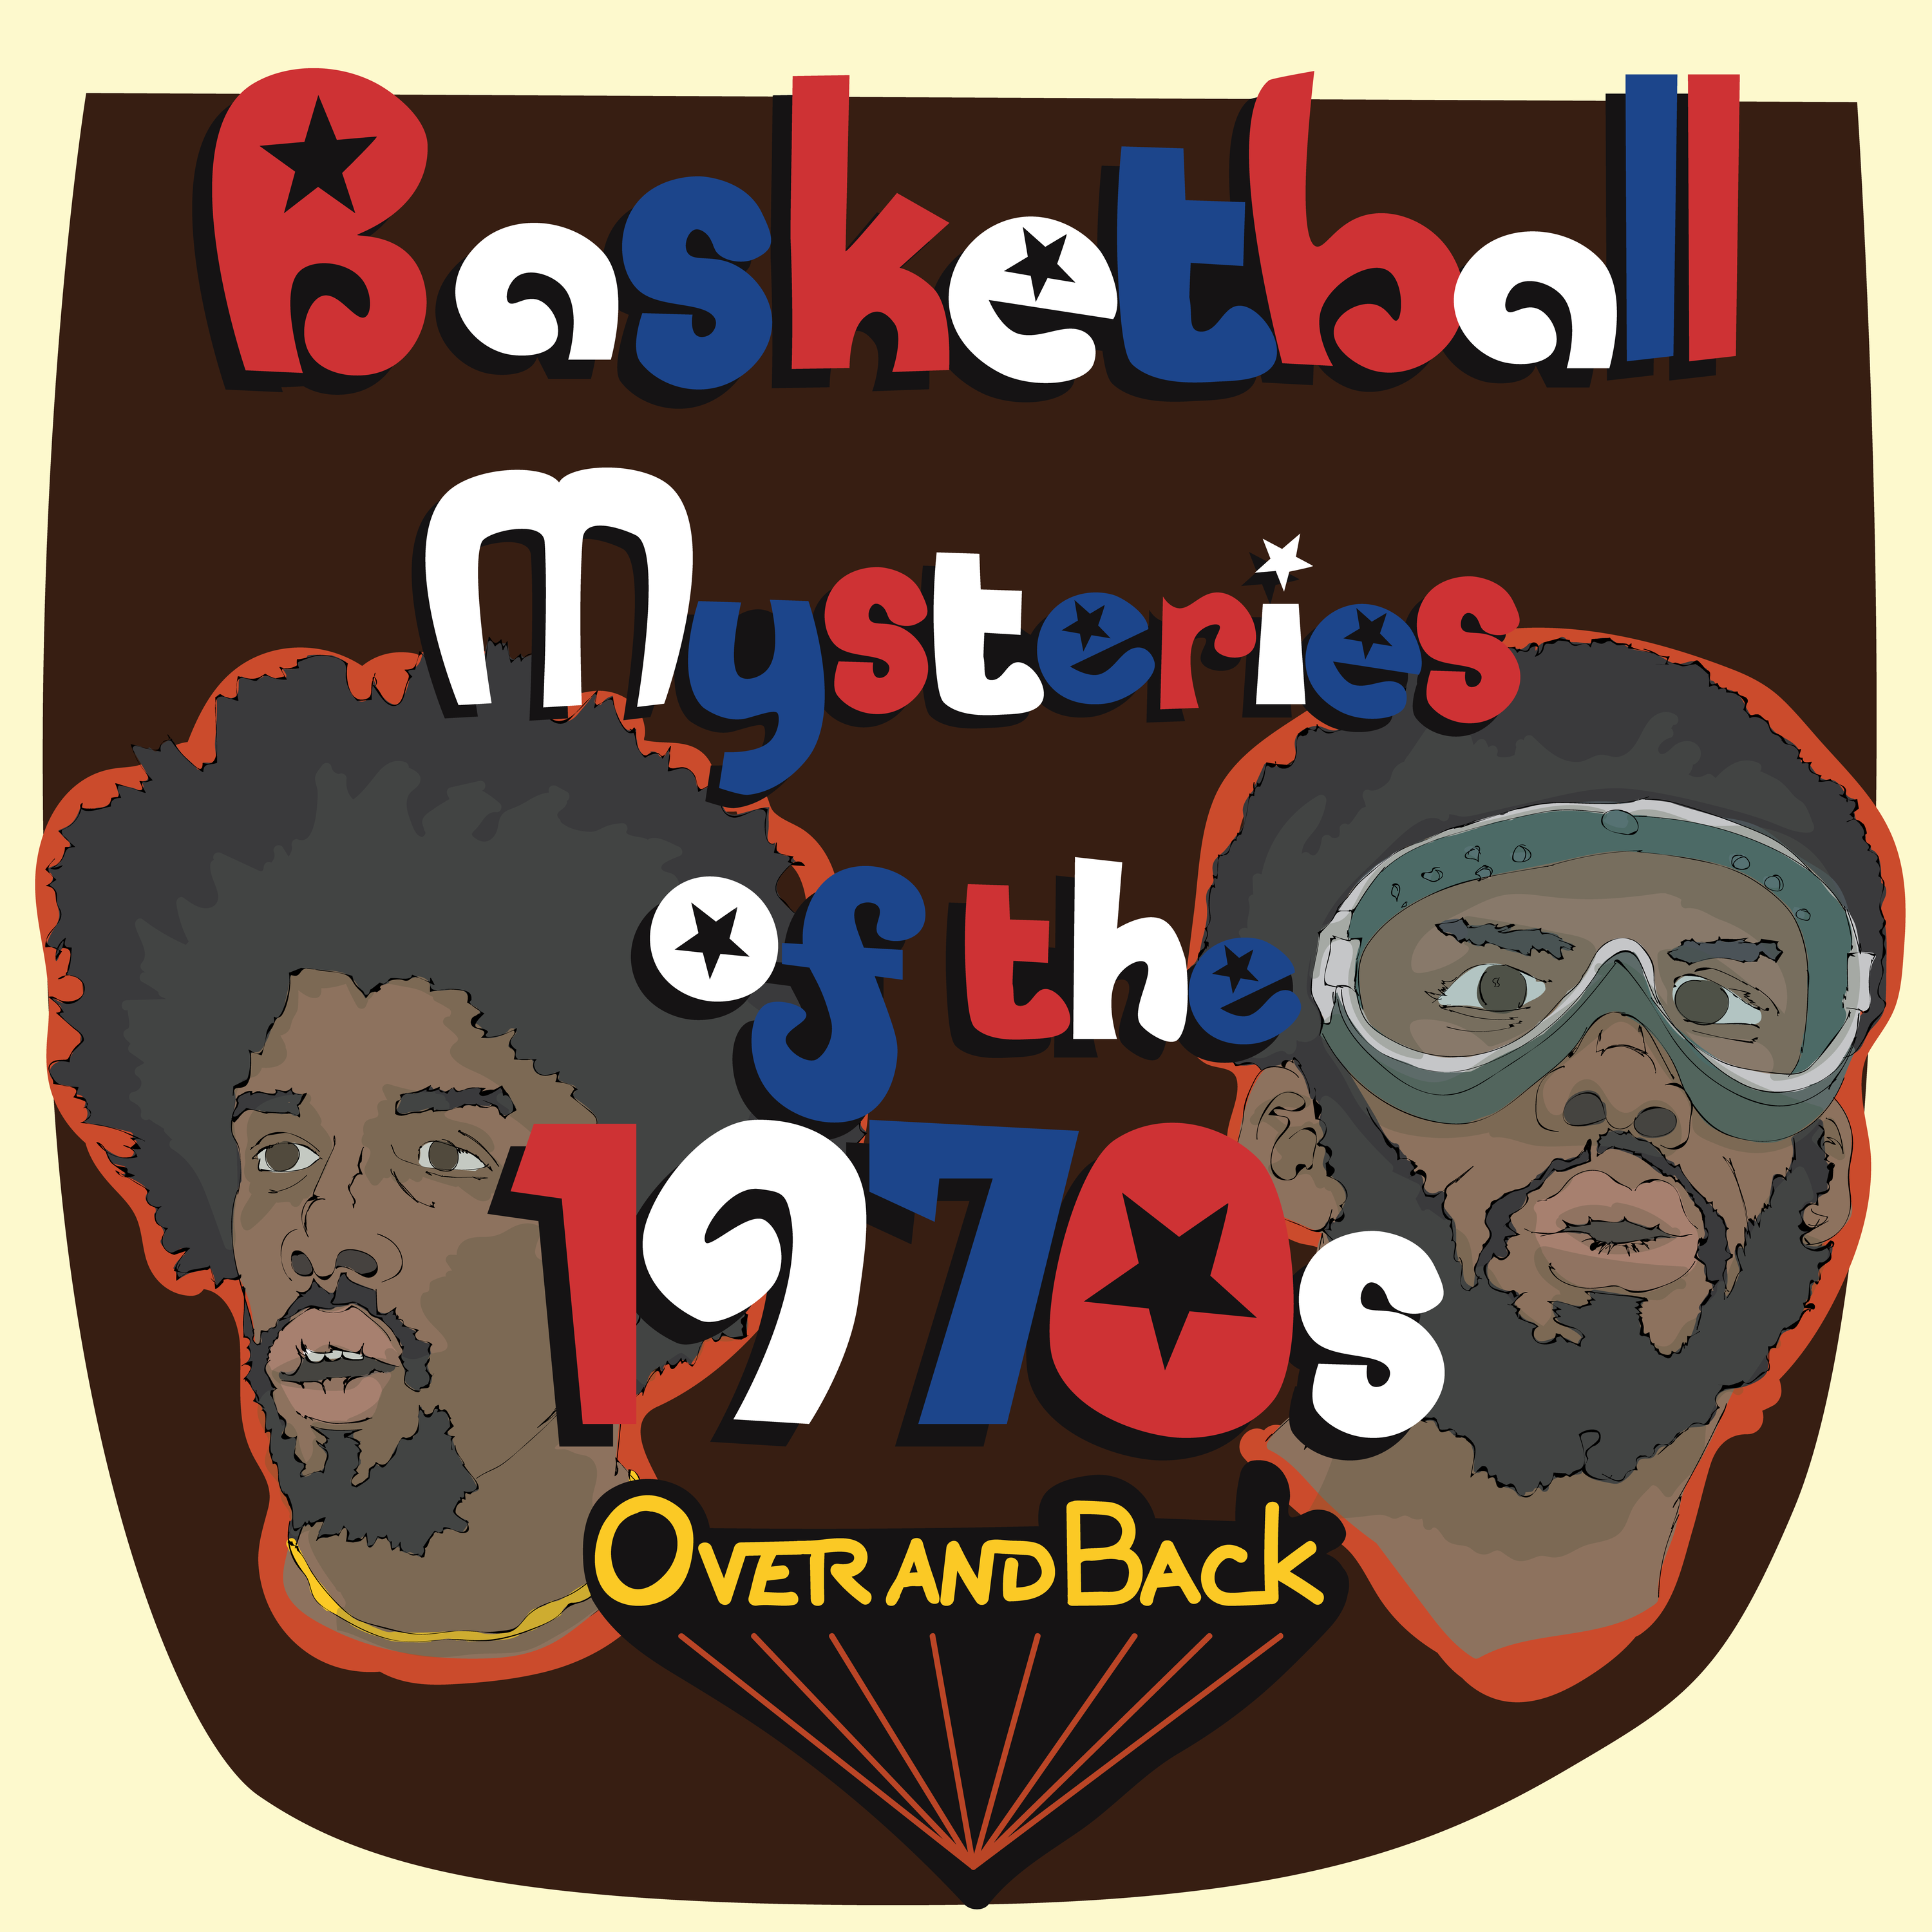 Who were the wildest ABA and NBA owners? (Basketball Mysteries of the 1970s #12)